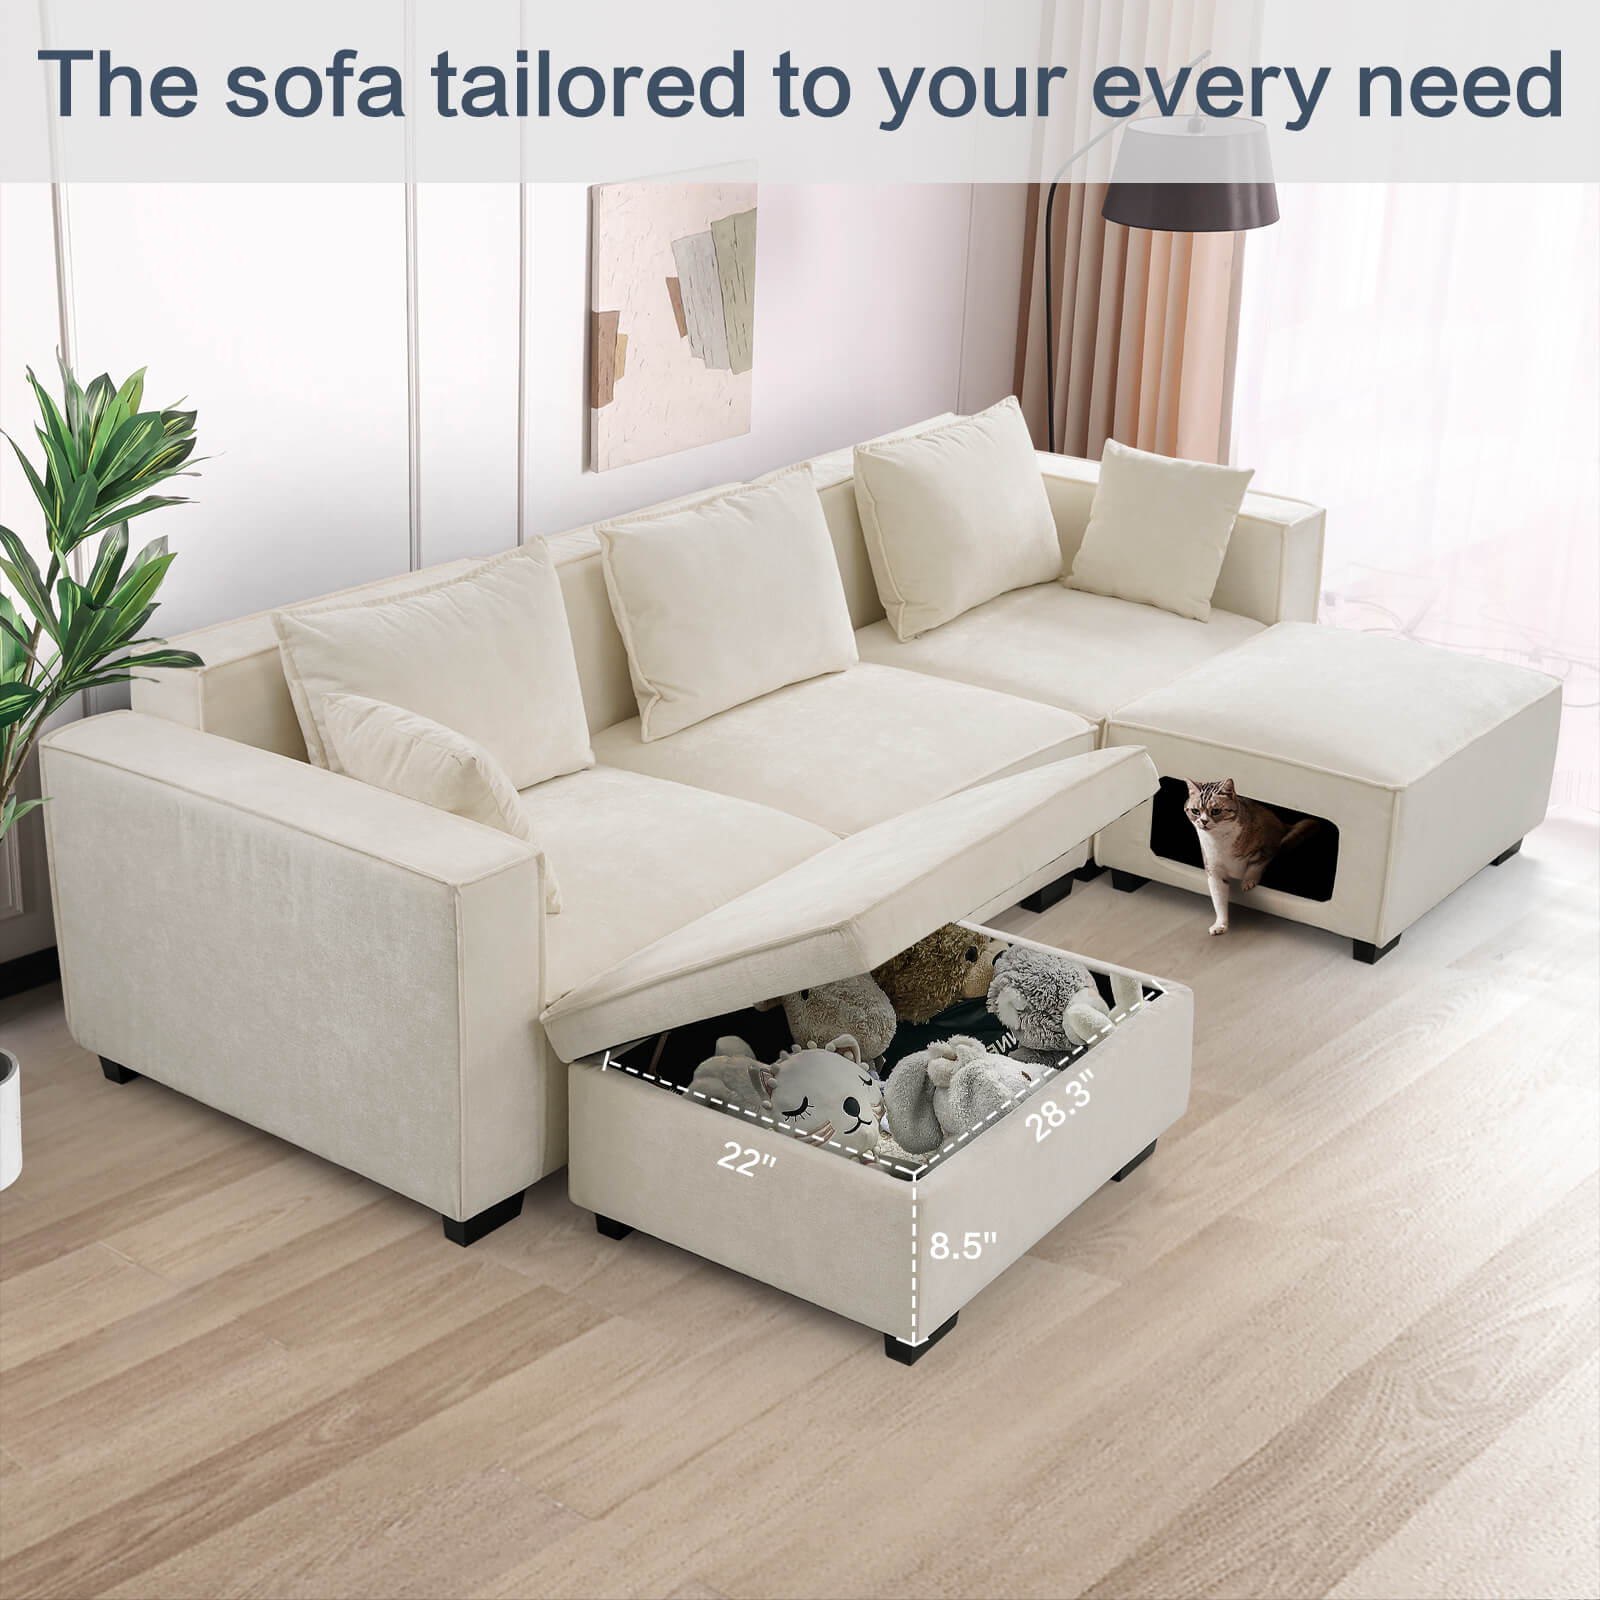 Modular Sectional 5 Seat Sofa, Extra Large U Shaped Couch with Storage & Pet Ottoman